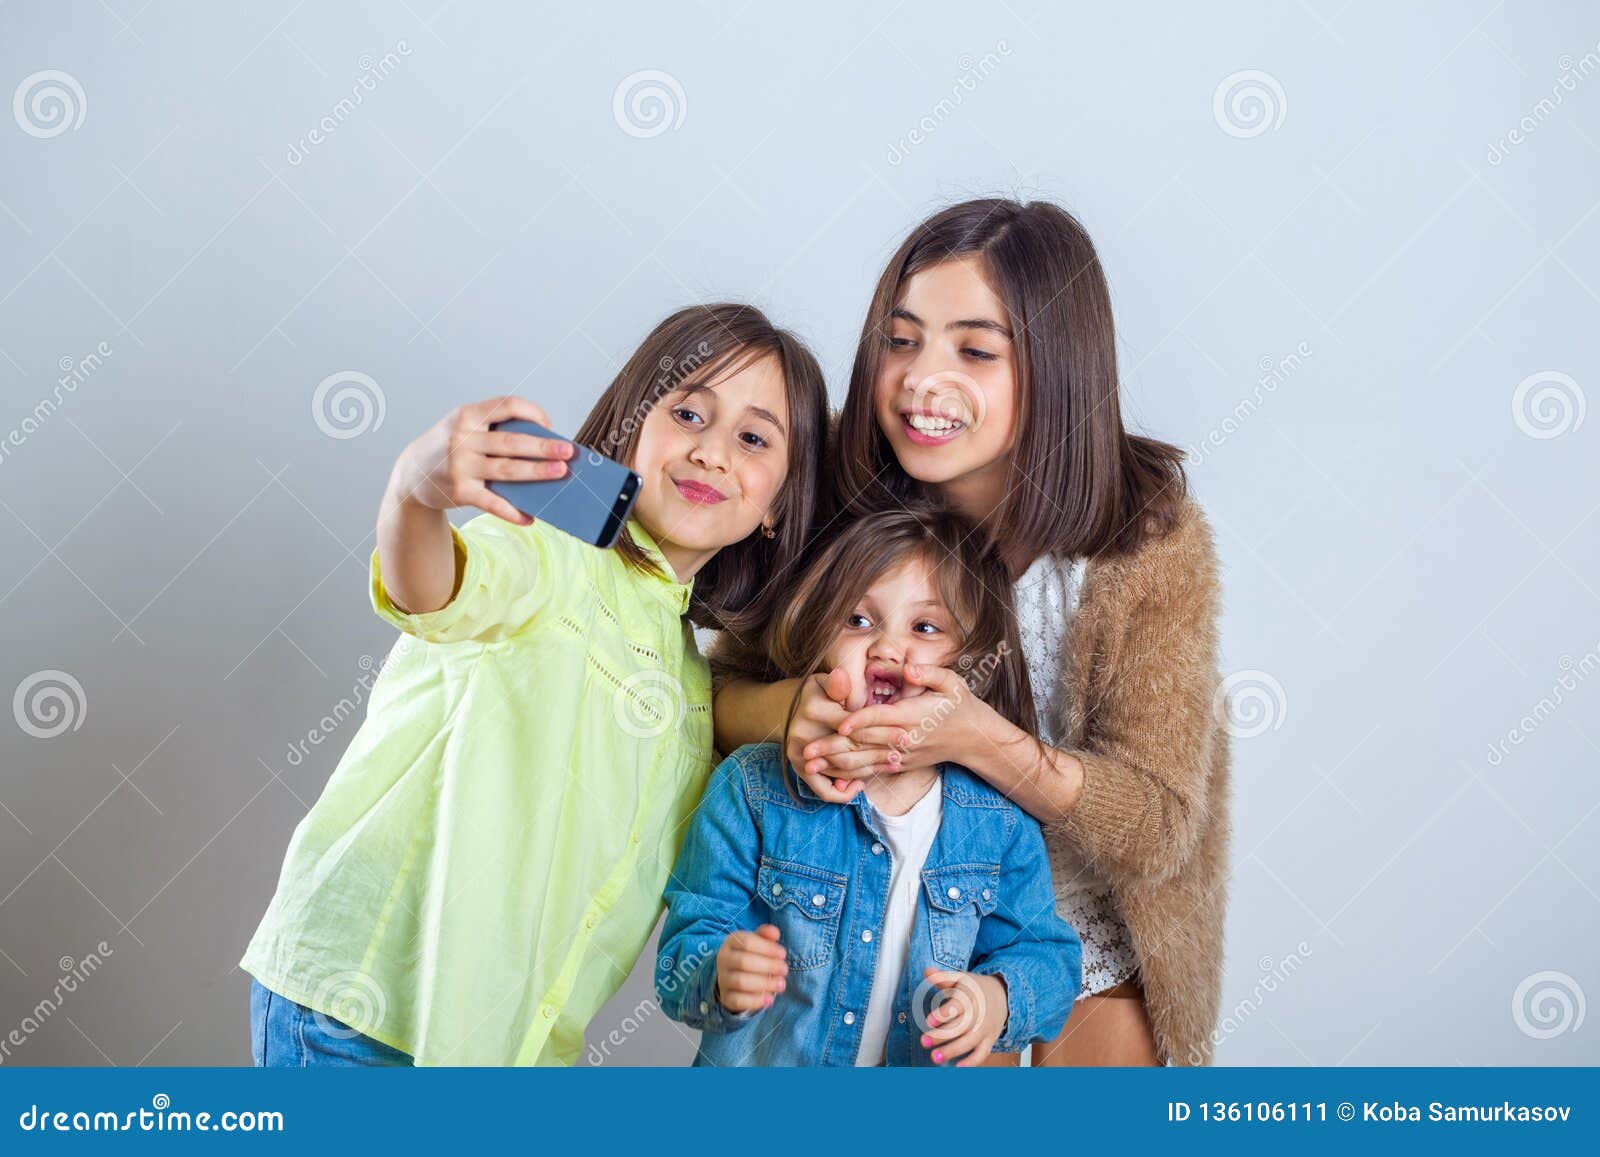 Three Sisters Posing and Taking Selfies in the Studio Stock Image ...